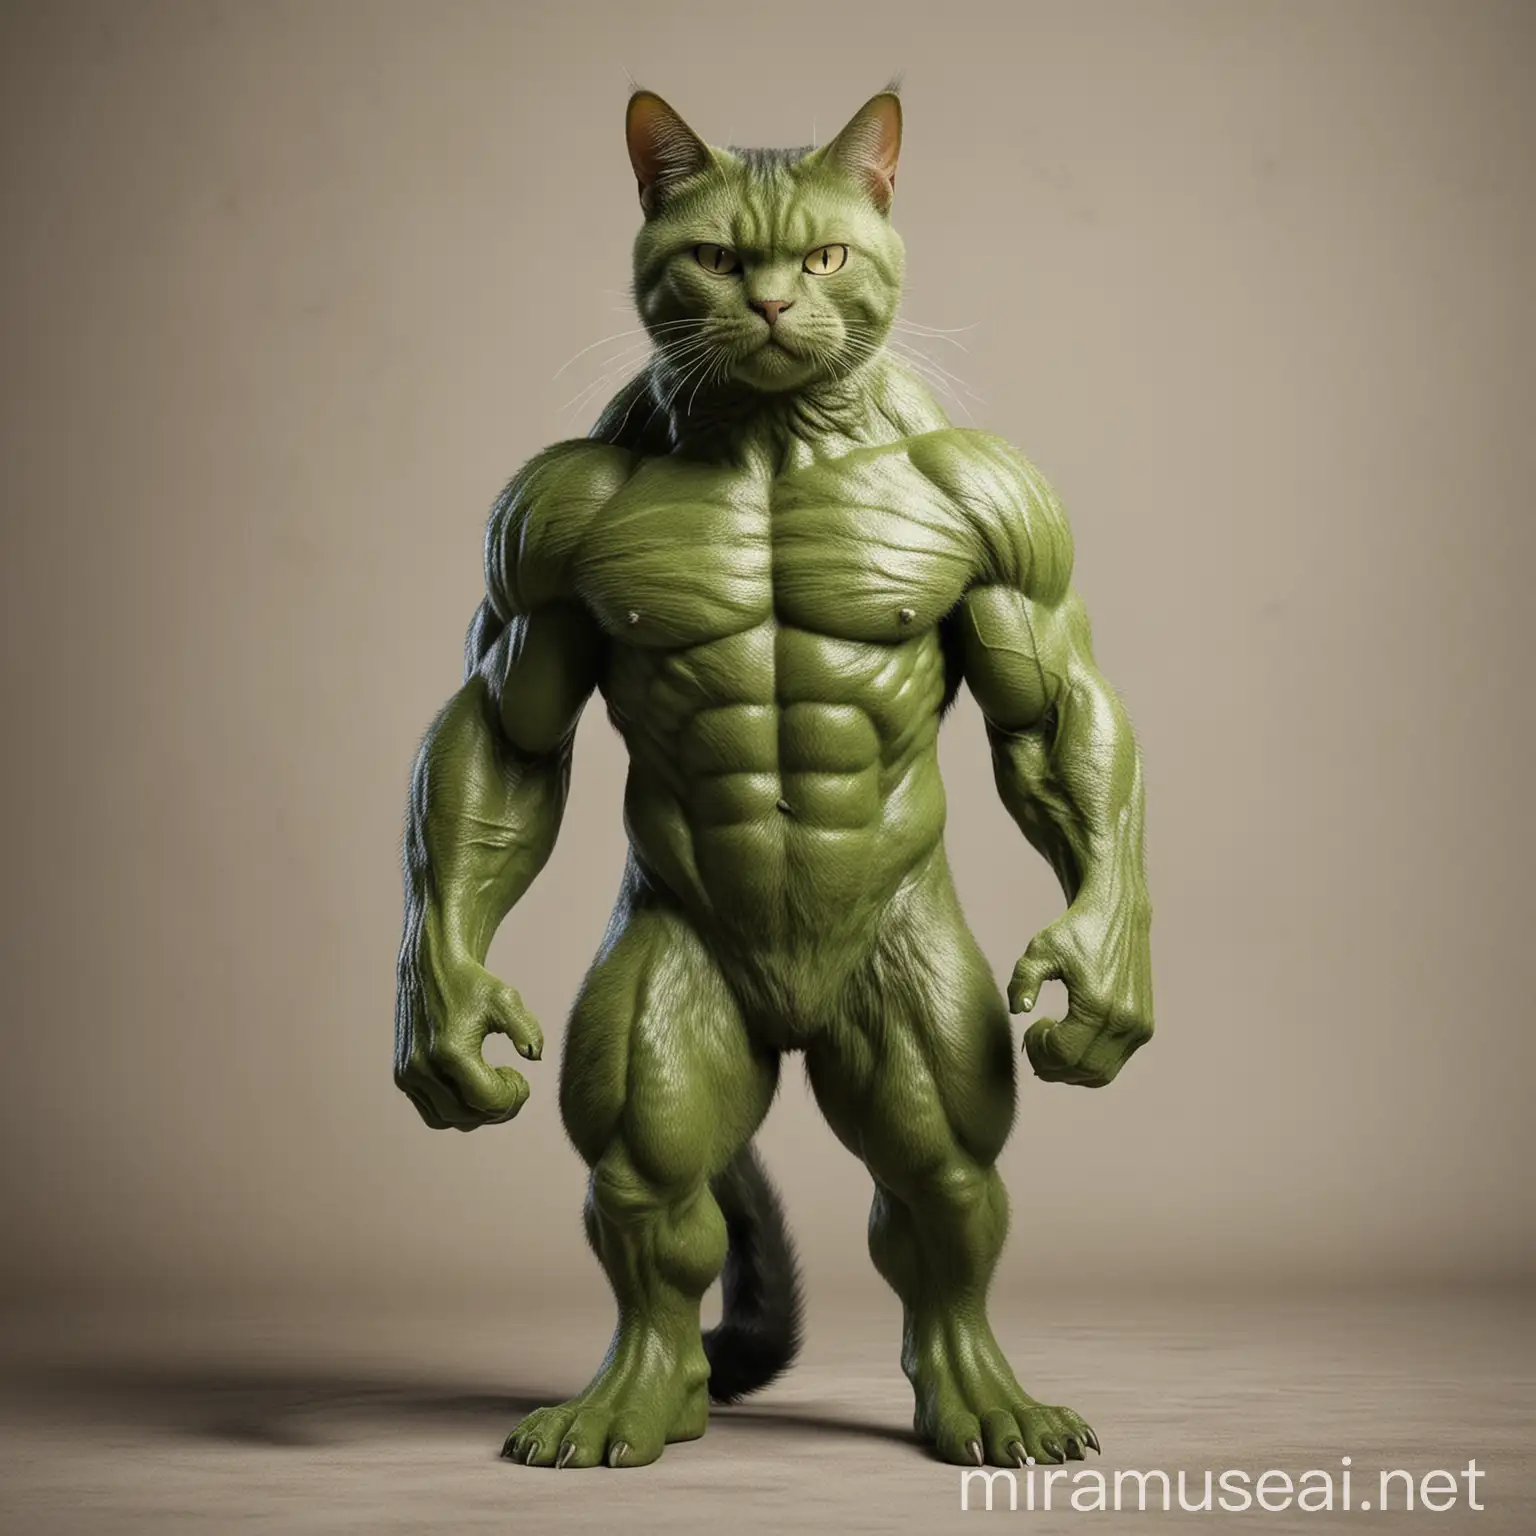 Powerful HulkStyle Cat Standing Strong